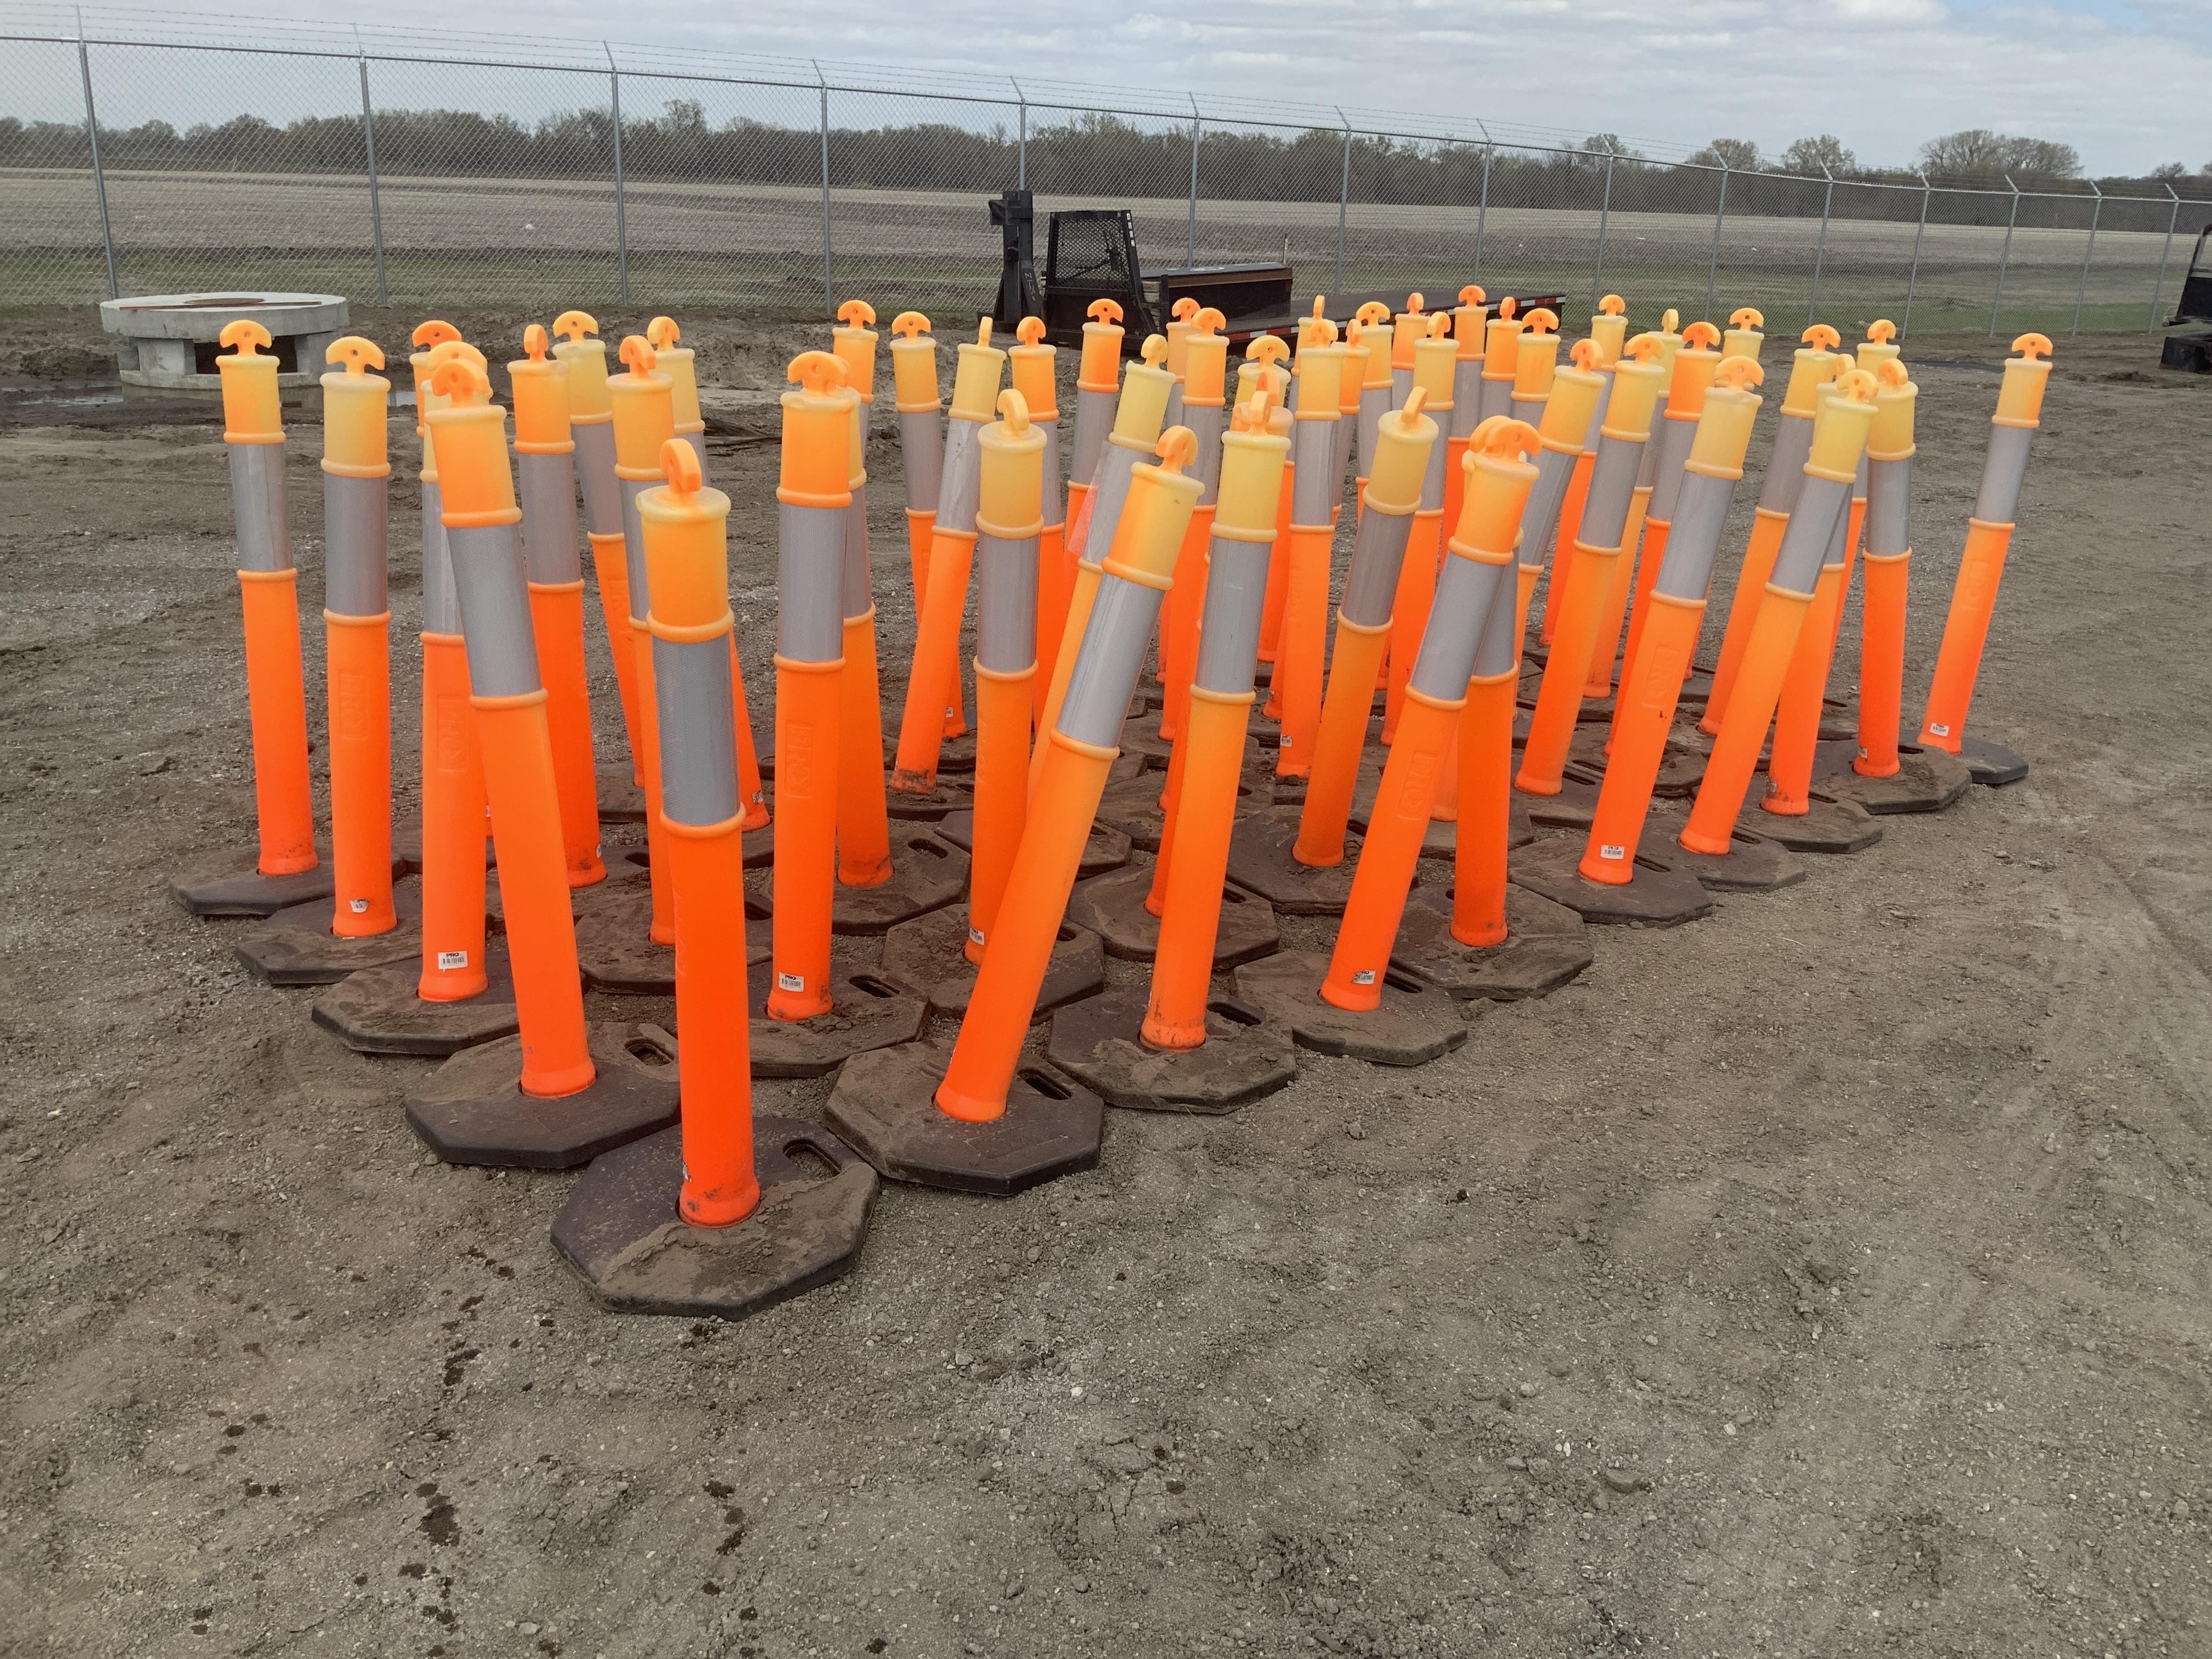 Sold at Auction: TOY STORY 2 TRAFFIC SAFETY CONES